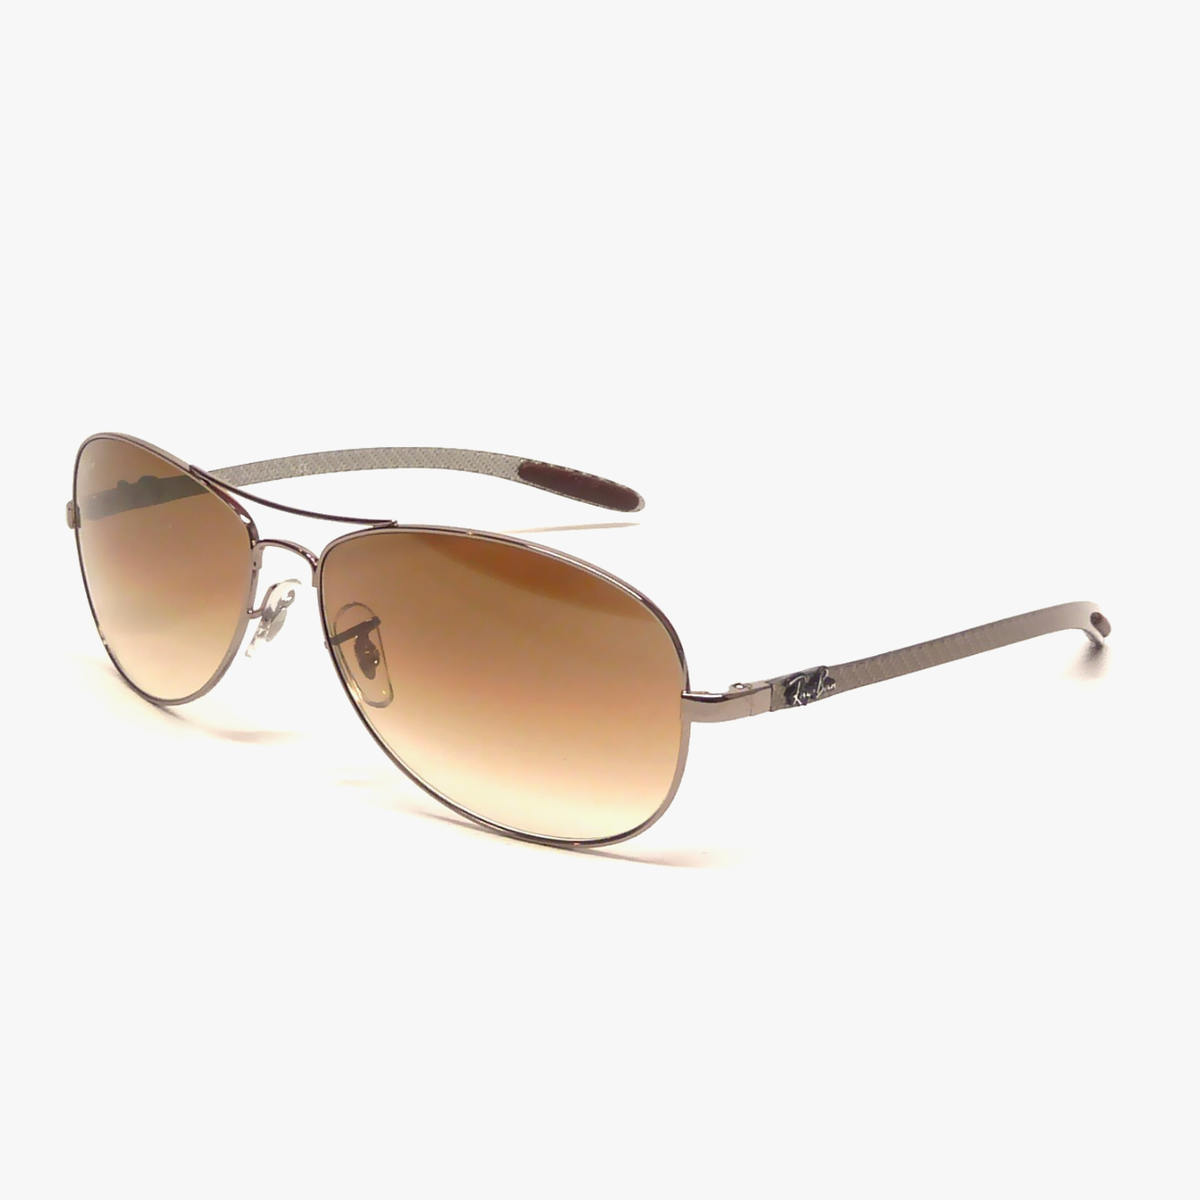 Ray Ban RB8301 size 59